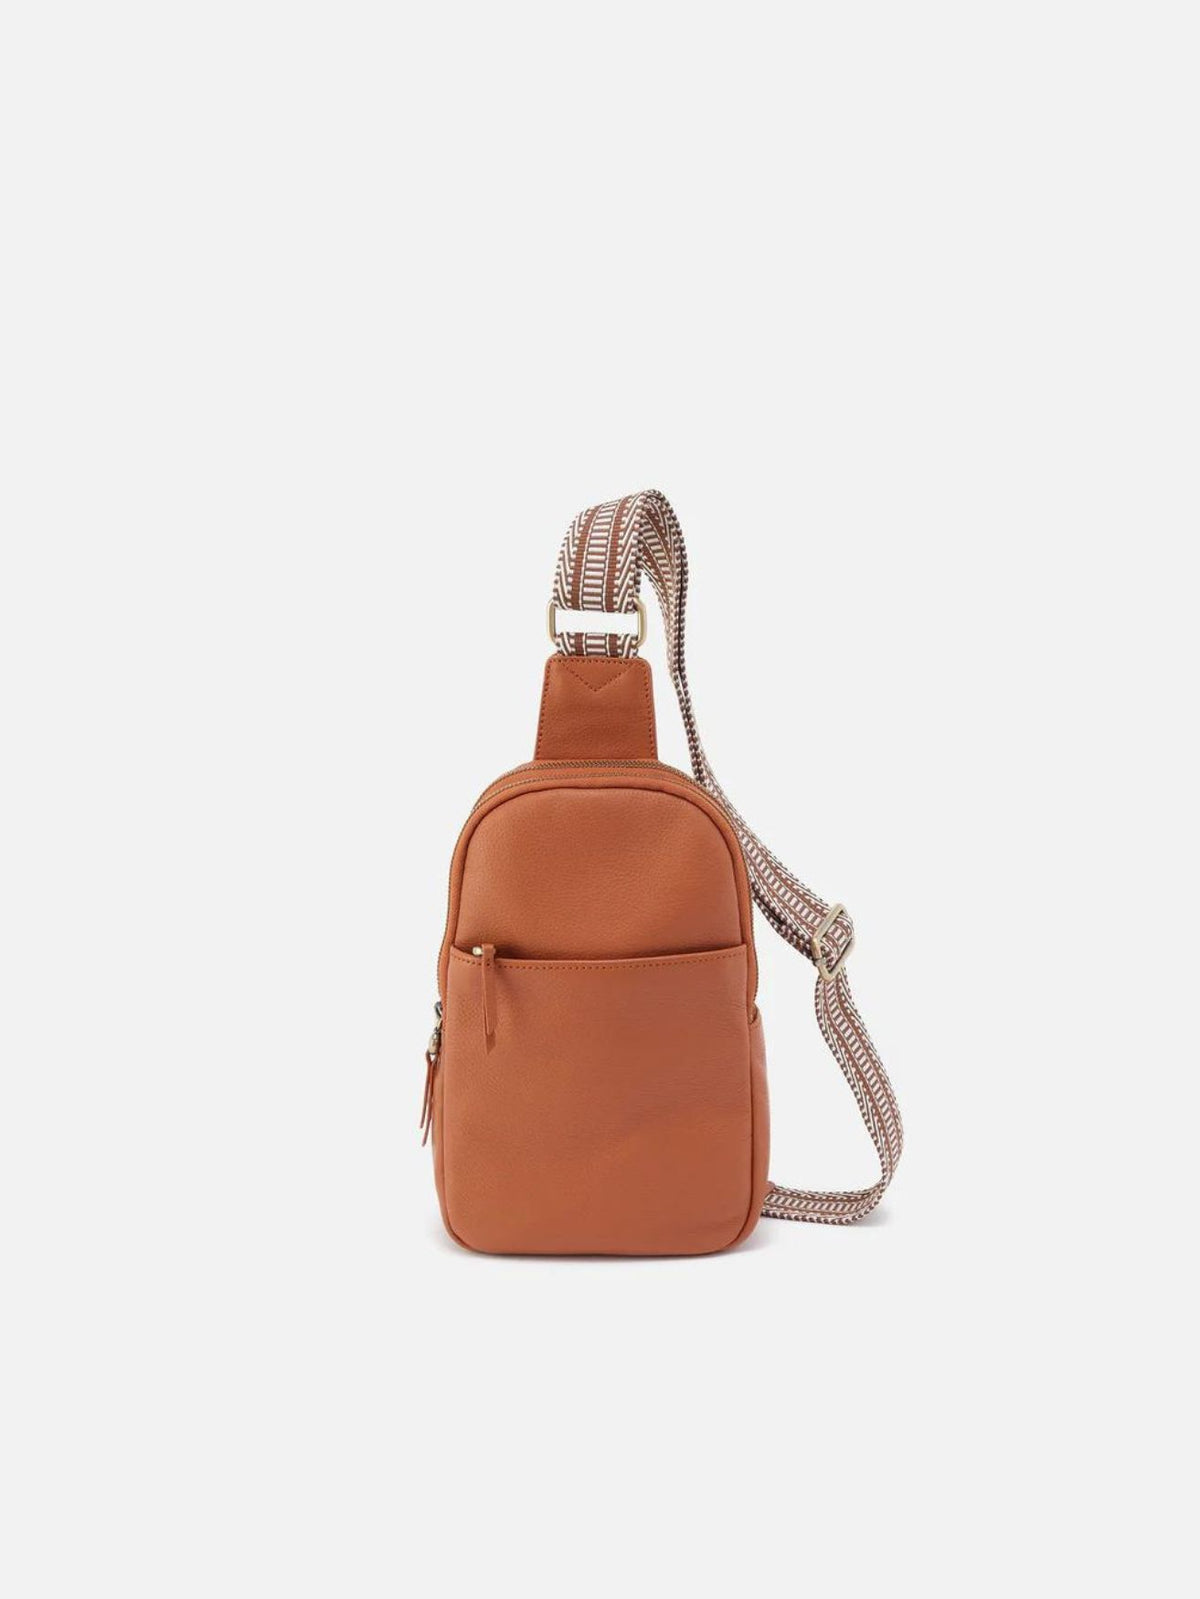 hobo cass pebbled leather sling bag in butterscotch-front